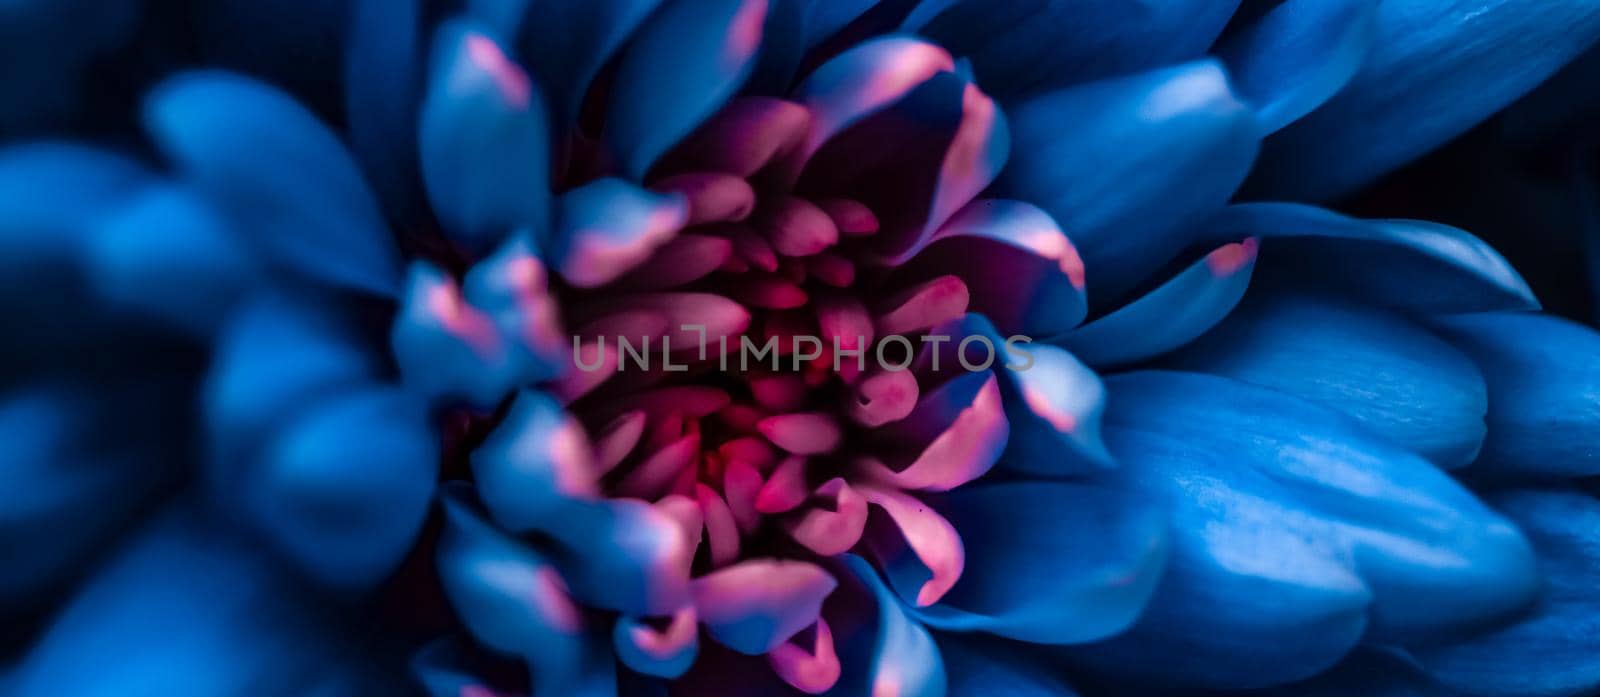 Blue daisy flower petals in bloom, abstract floral blossom art background, flowers in spring nature for perfume scent, wedding, luxury beauty brand holiday design by Anneleven